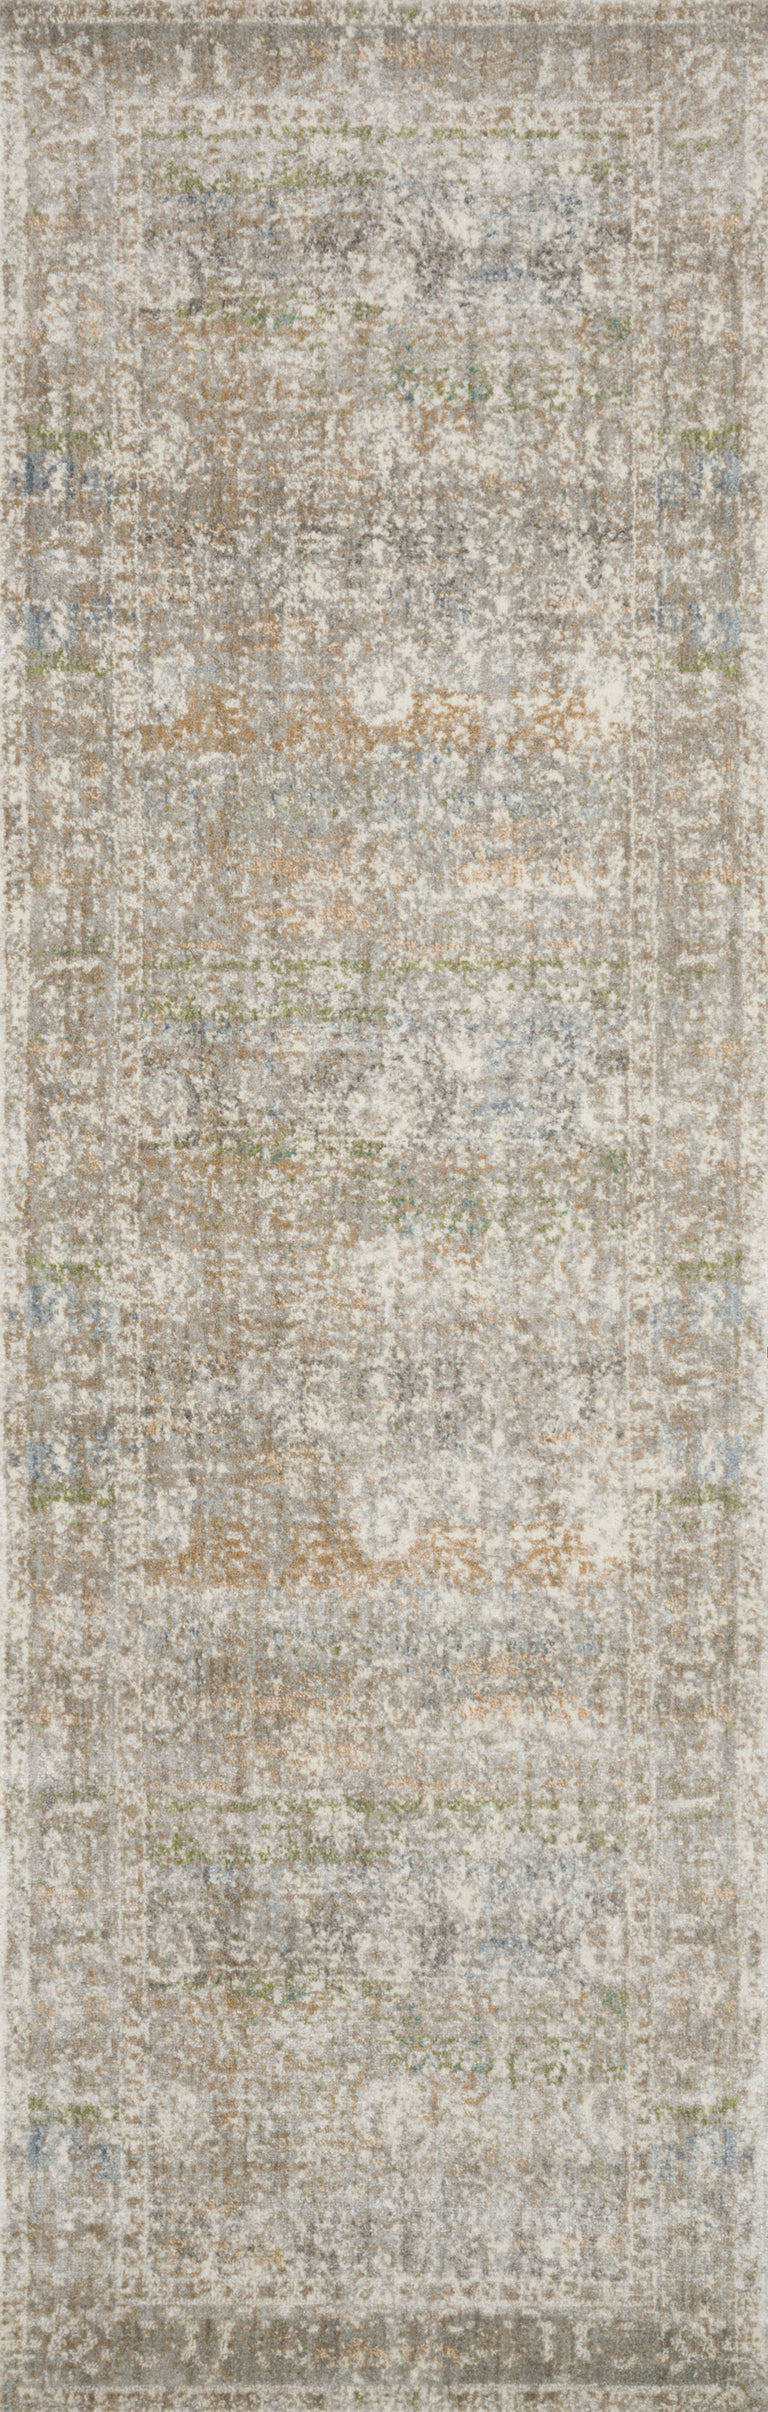 Loloi Rugs Anastasia Collection Rug in Grey, Multi - 7'10" x 10'10"